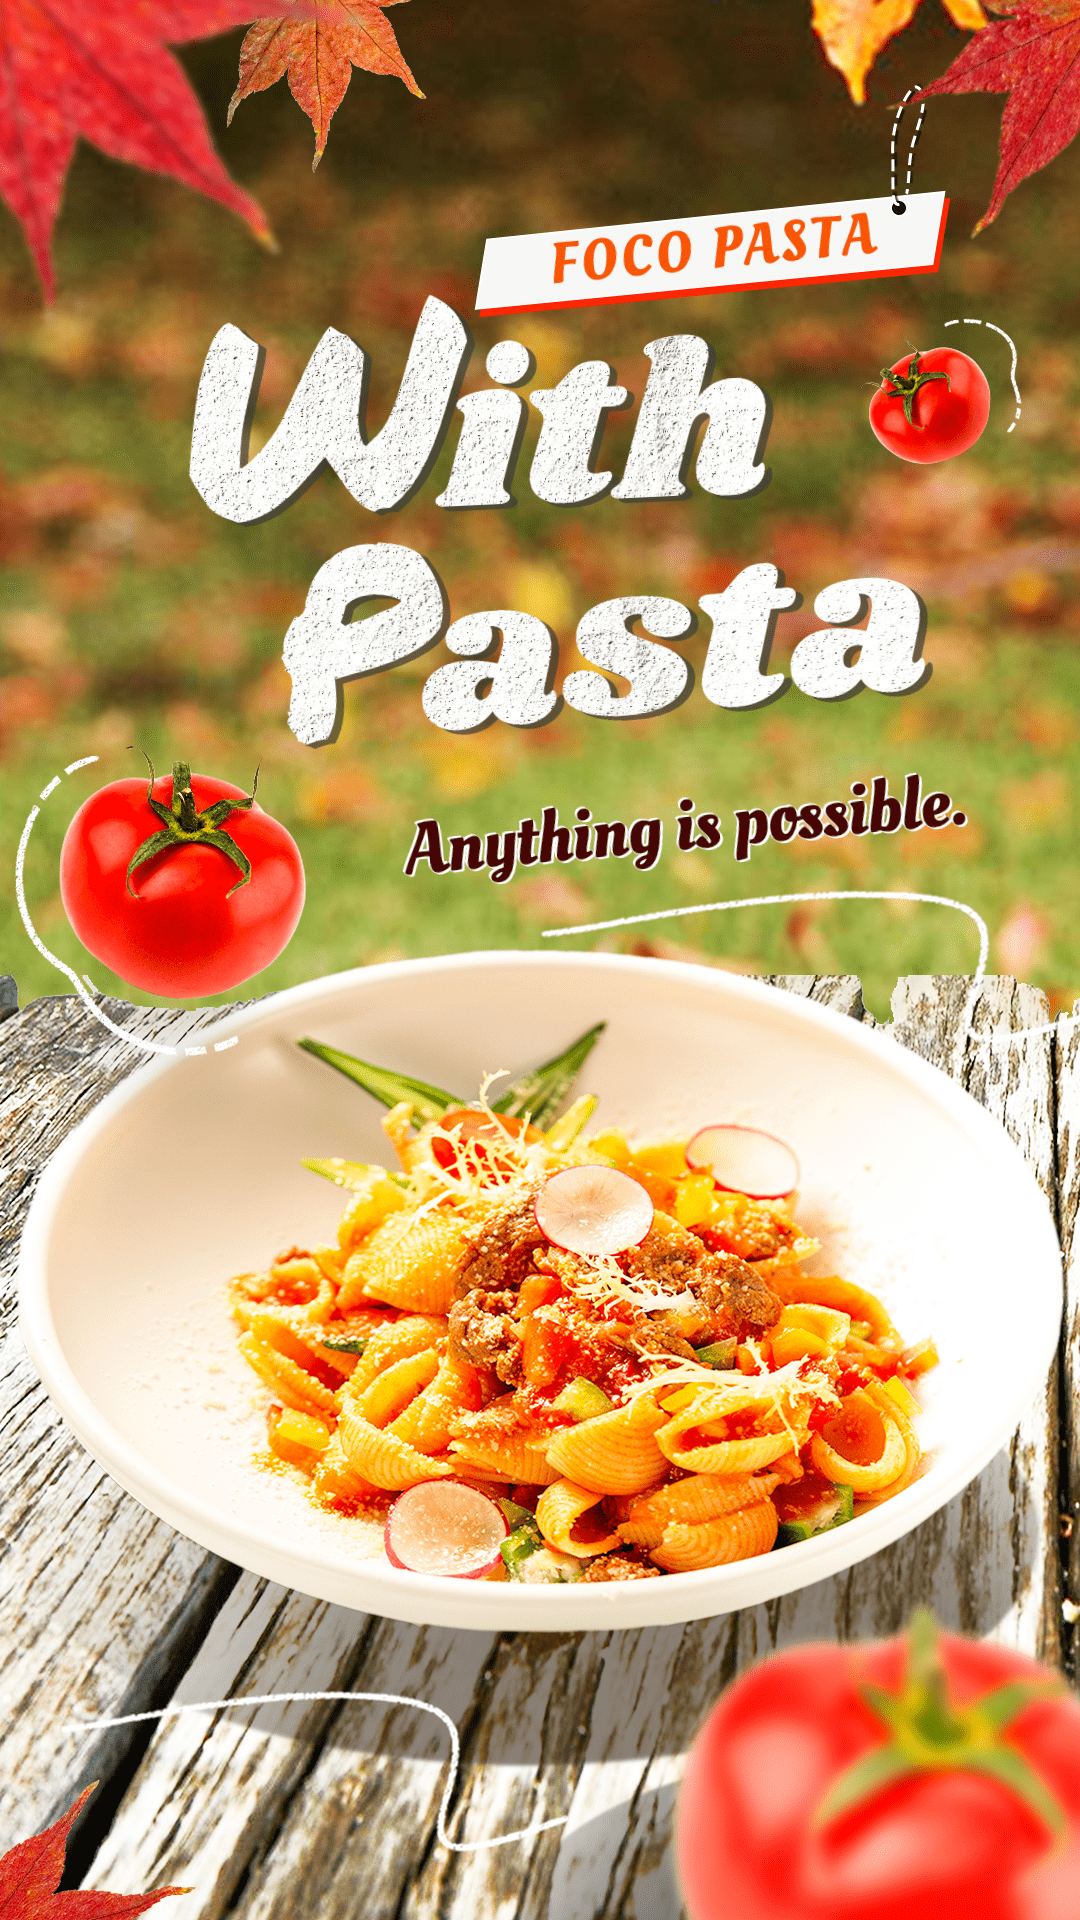 Pasta Groceries Food Supplies Ecommerce Story预览效果